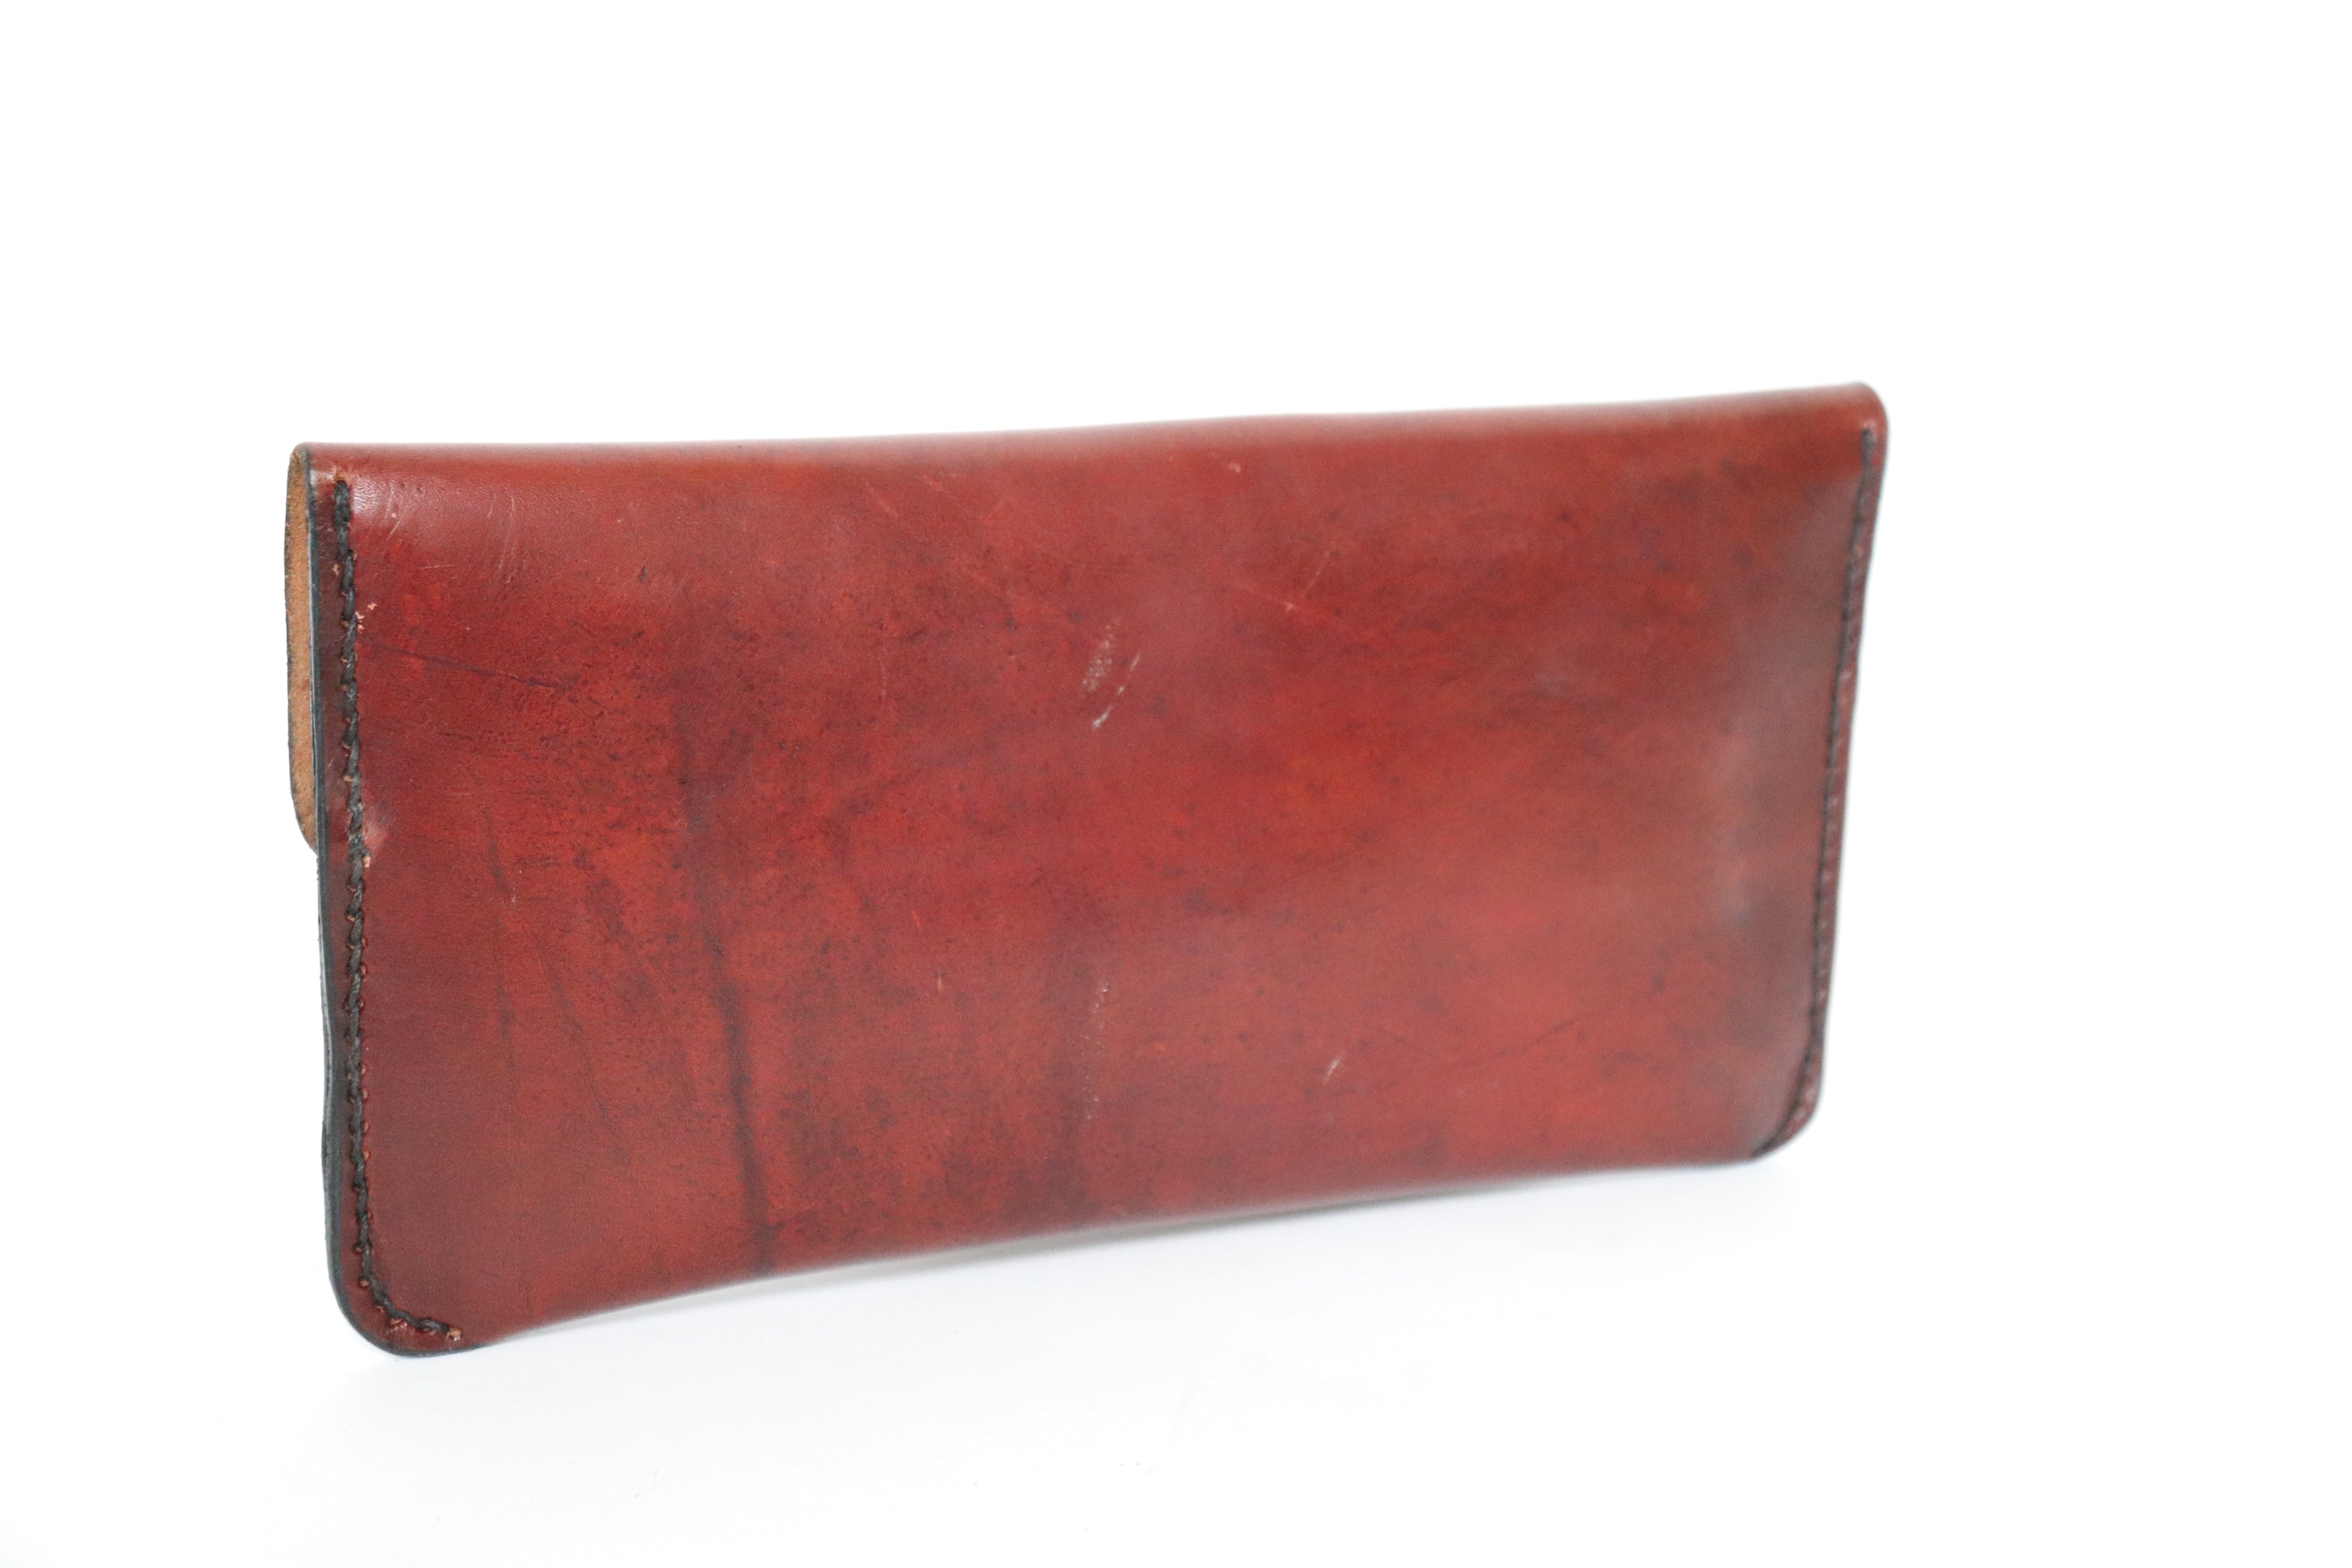 Vintage Clutch Bag - Tan Brown Leather - 1970s - Small